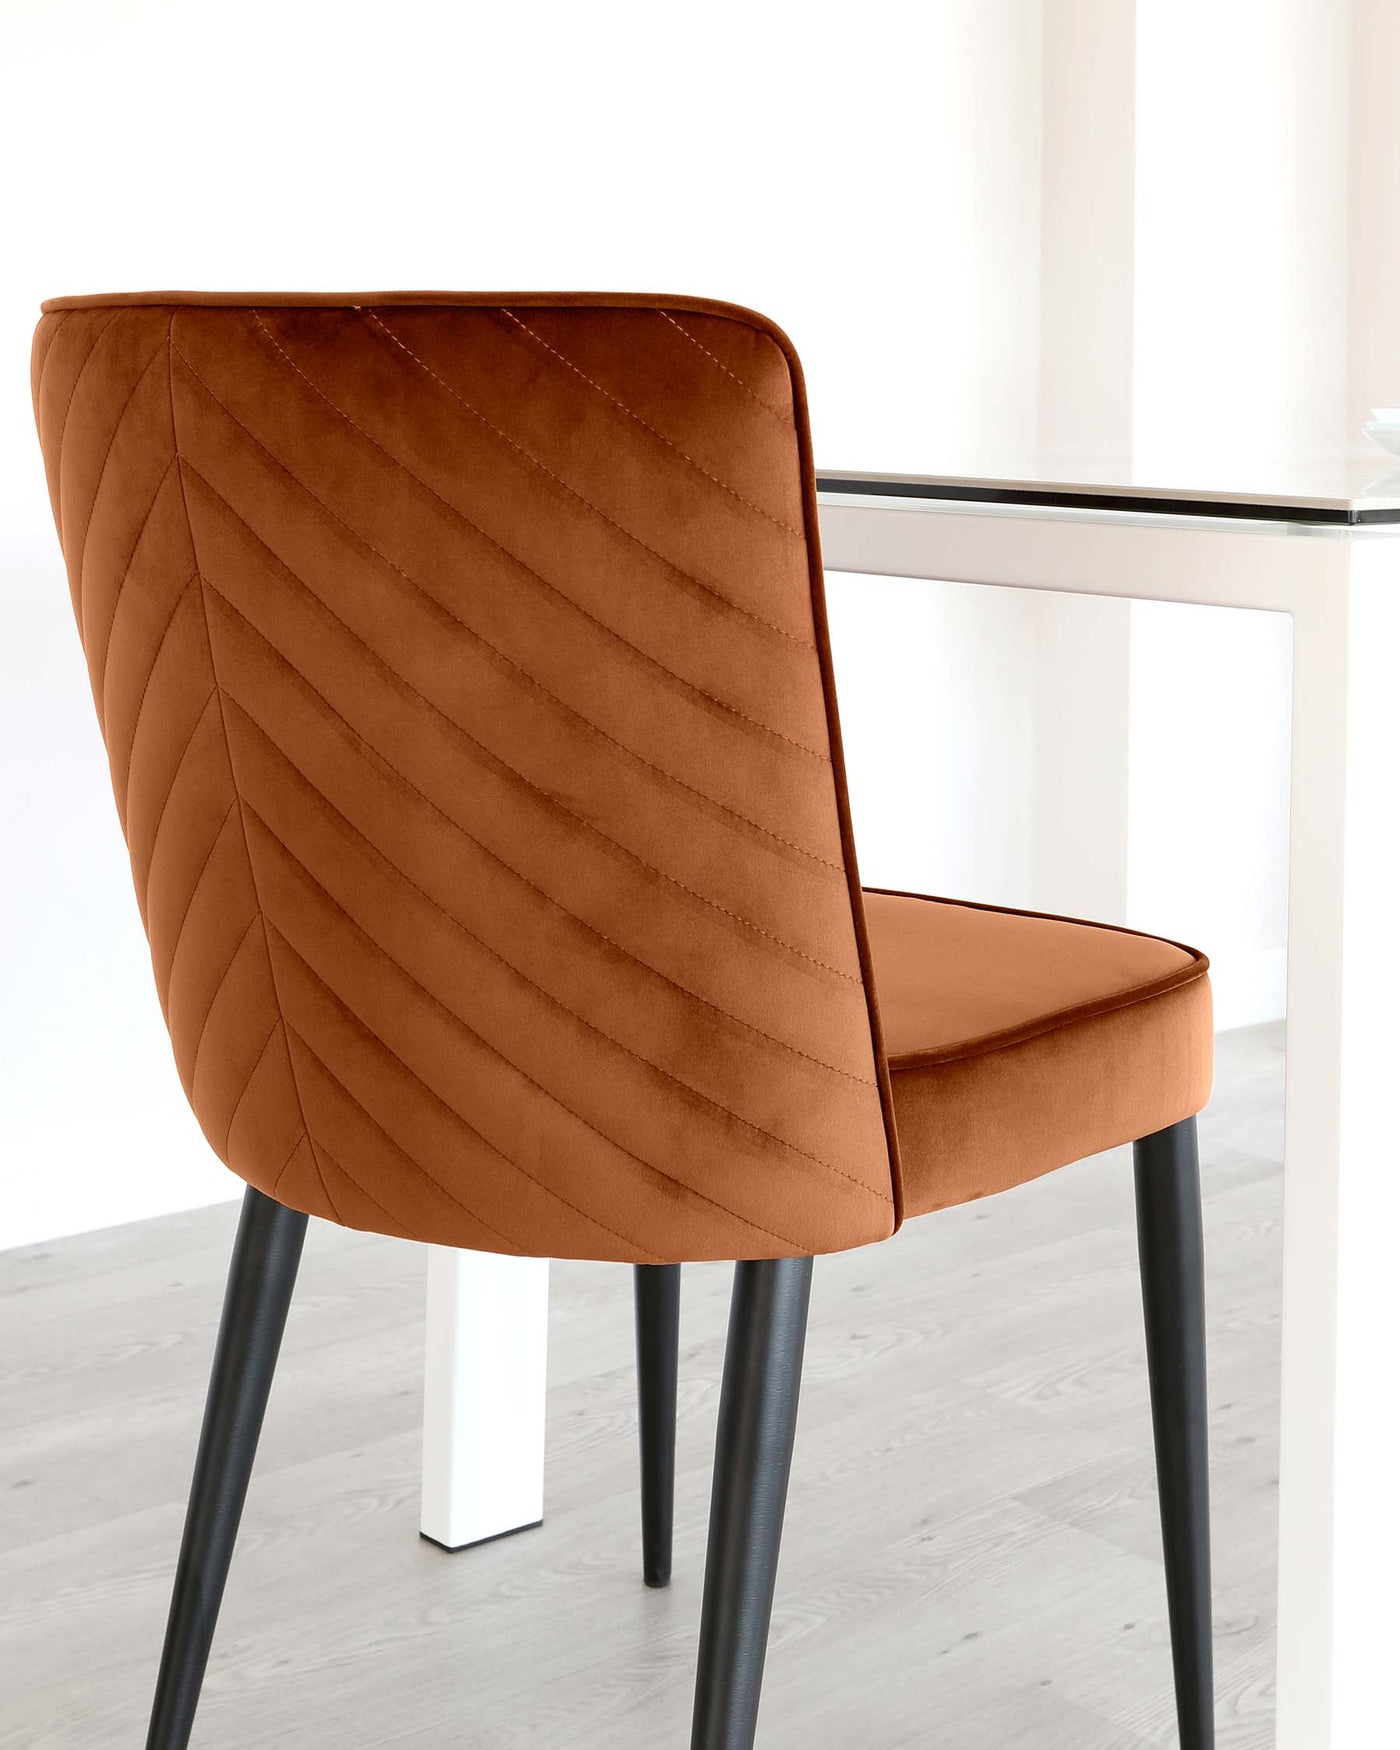 Modern dining chair with a caramel brown upholstered seat and quilted backrest, paired with black metal legs.